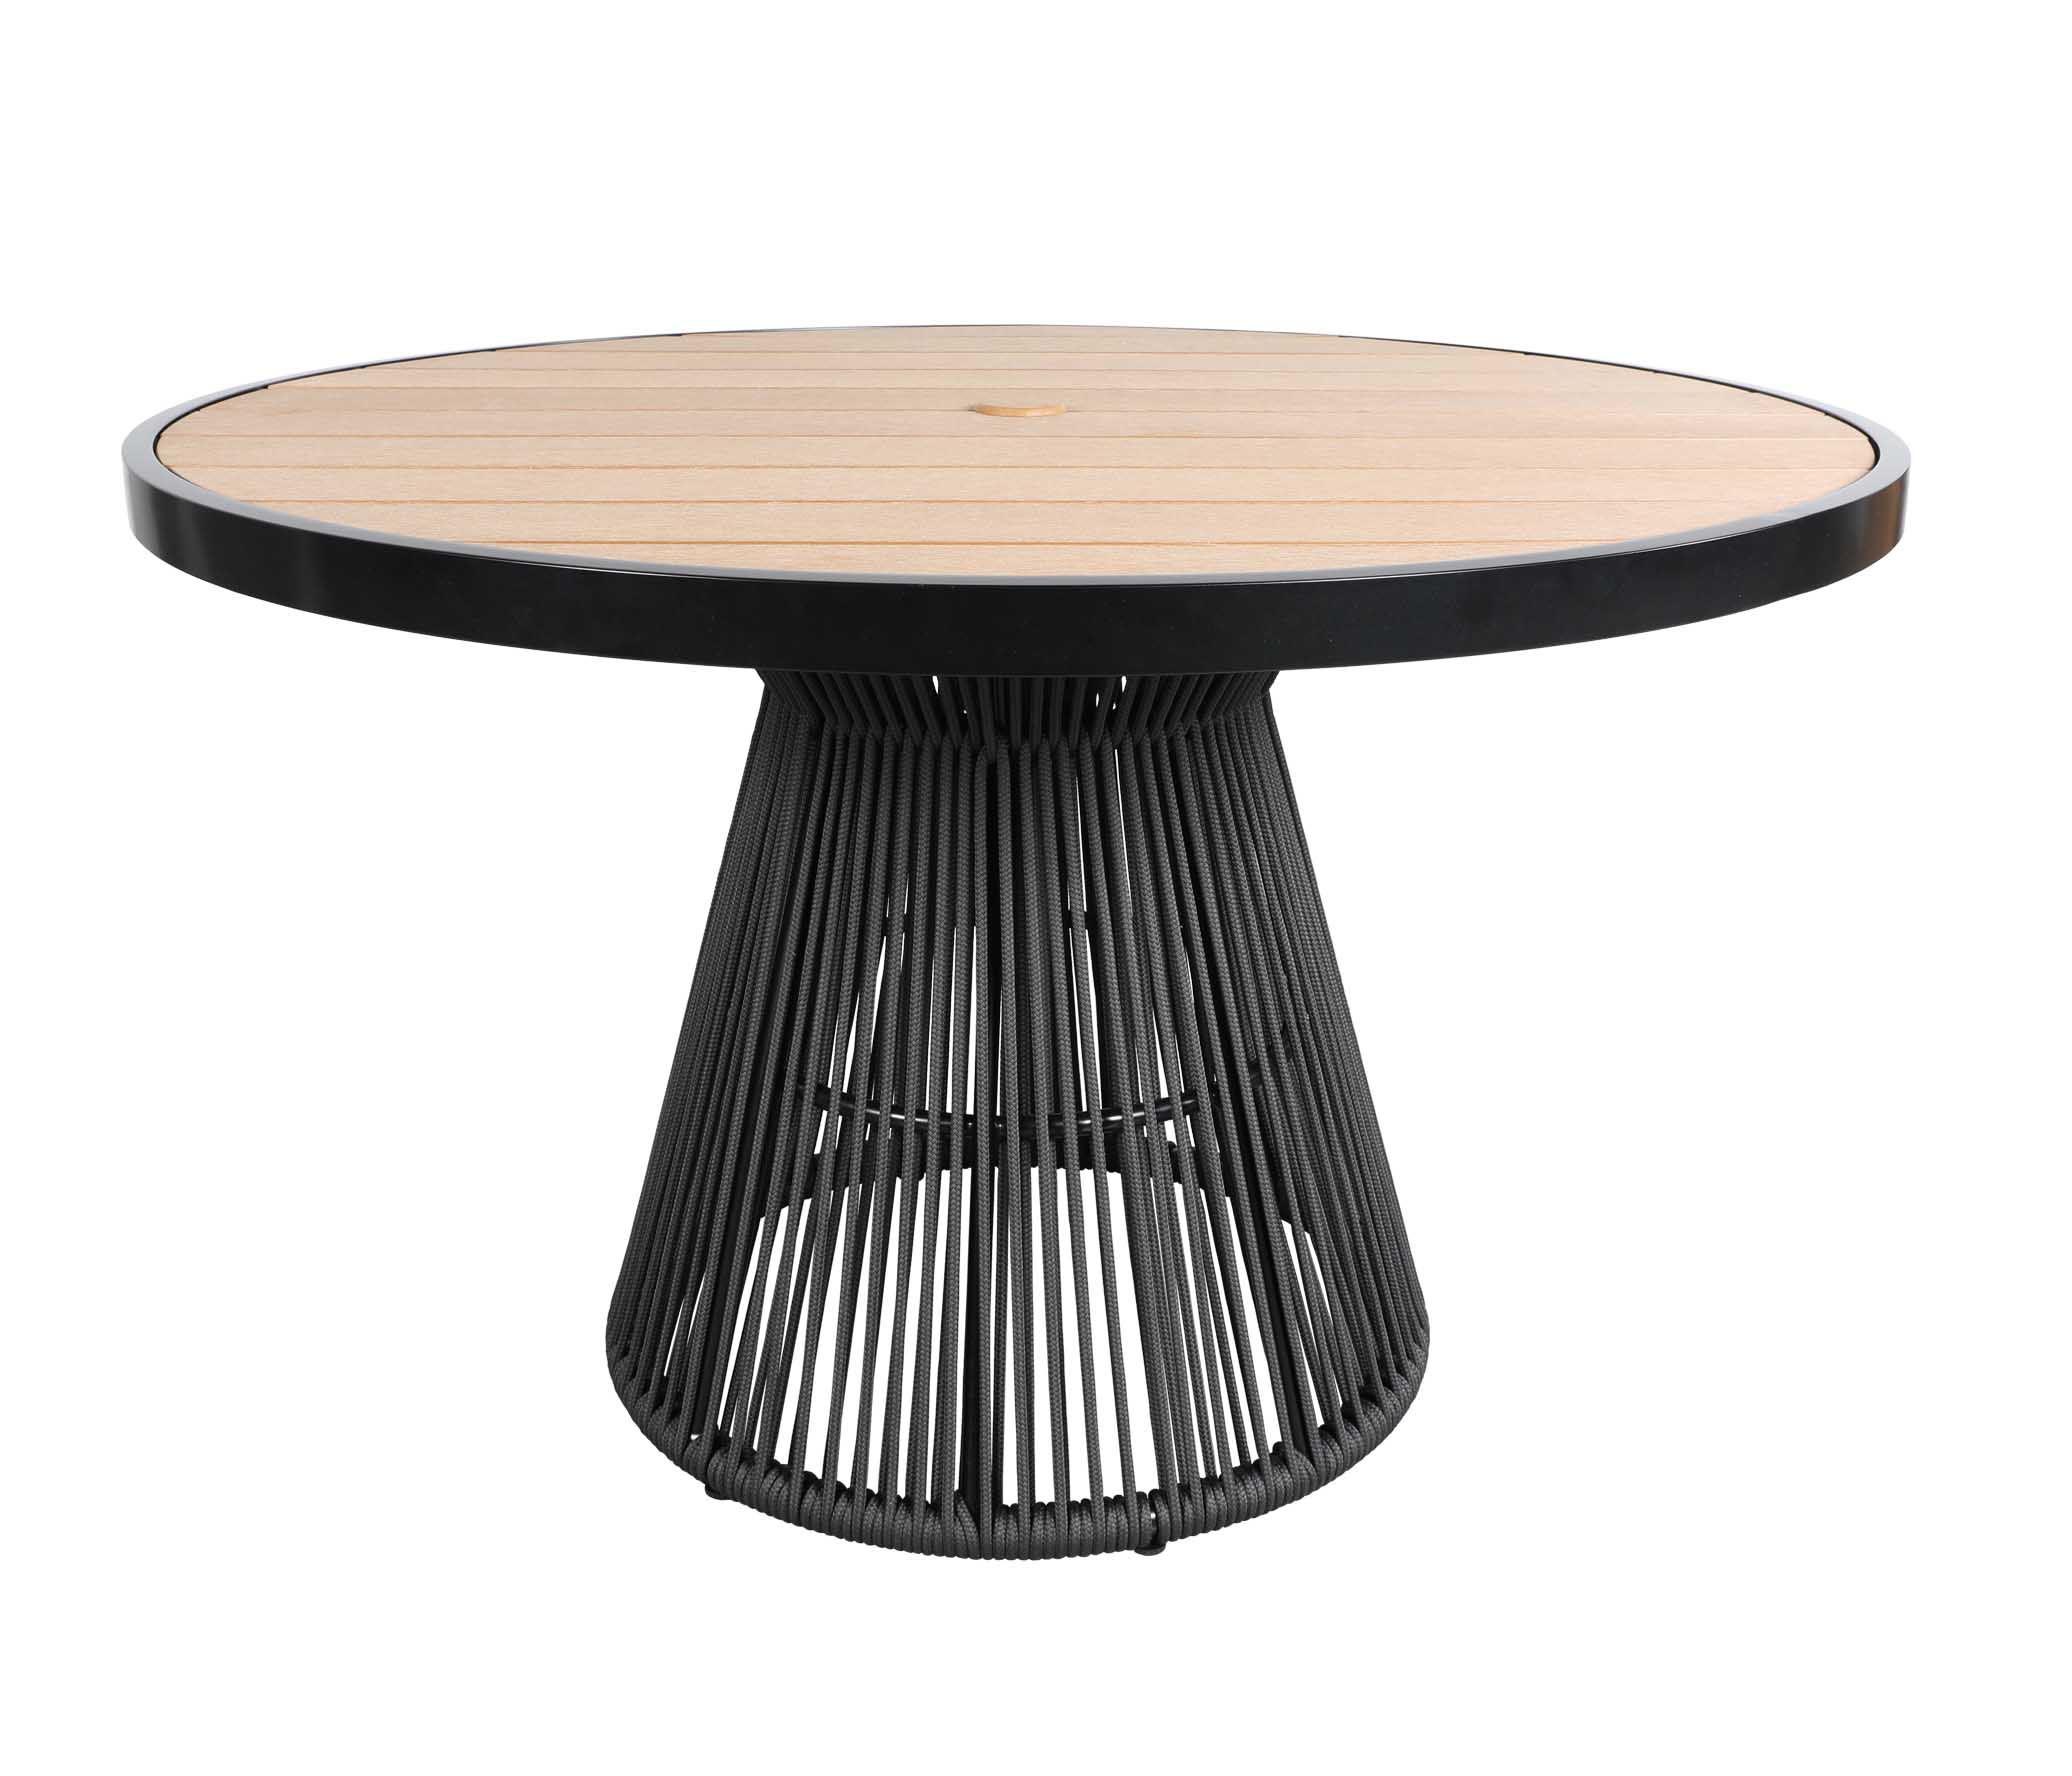 Patio Furniture By Details, Round Outdoor Dining Table For 6 Canada